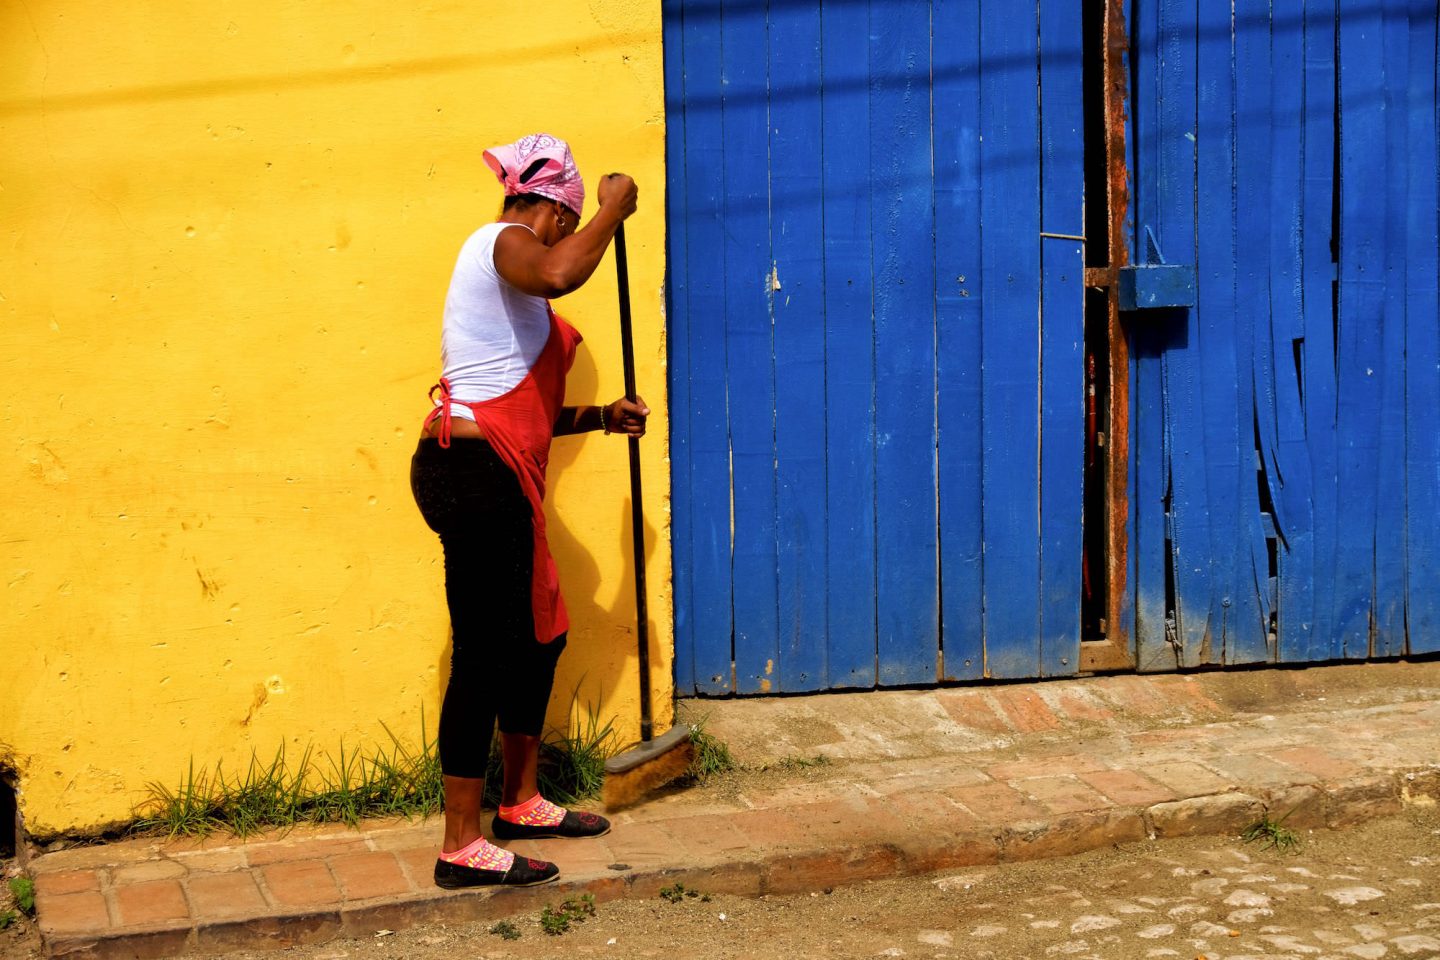 Cuban woman cleans the streets in Trinidad. Daily life in Cuba.